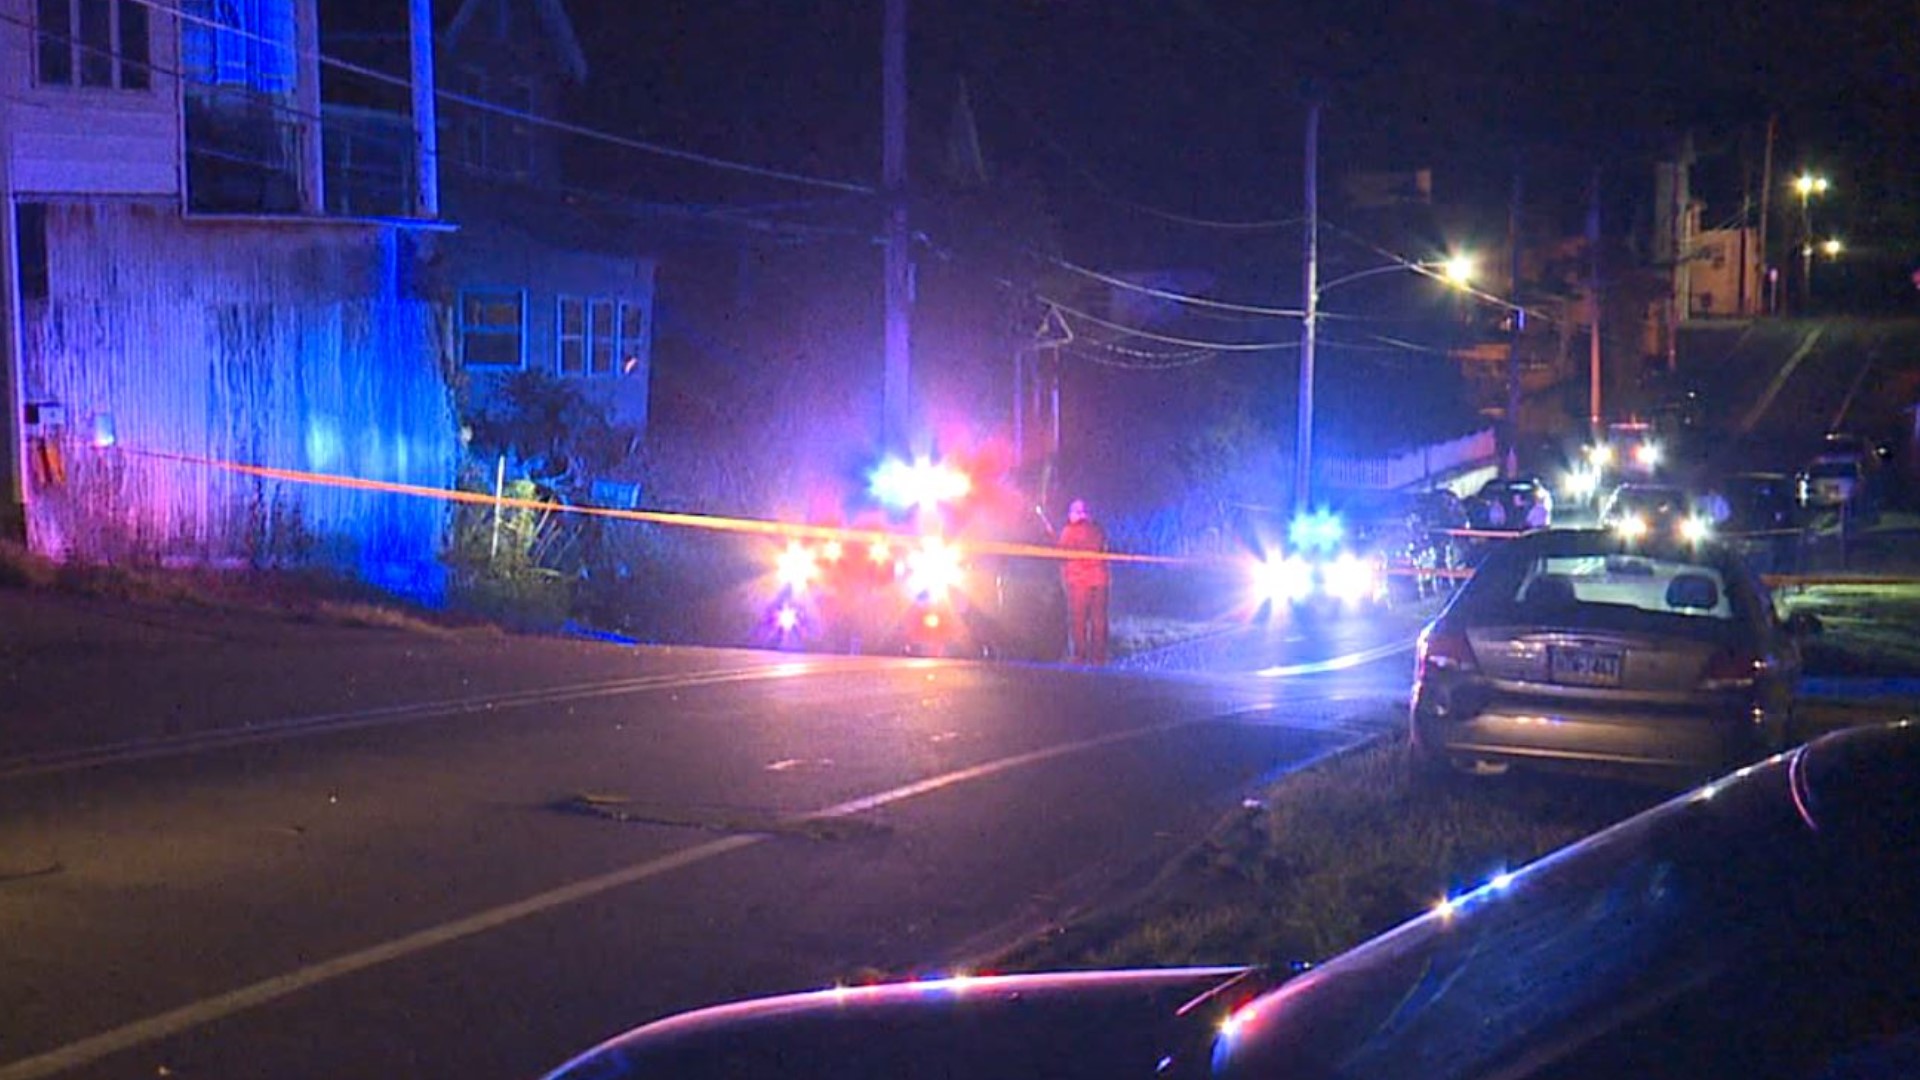 We now know how a woman died in Luzerne County. Police say she was stabbed to death.